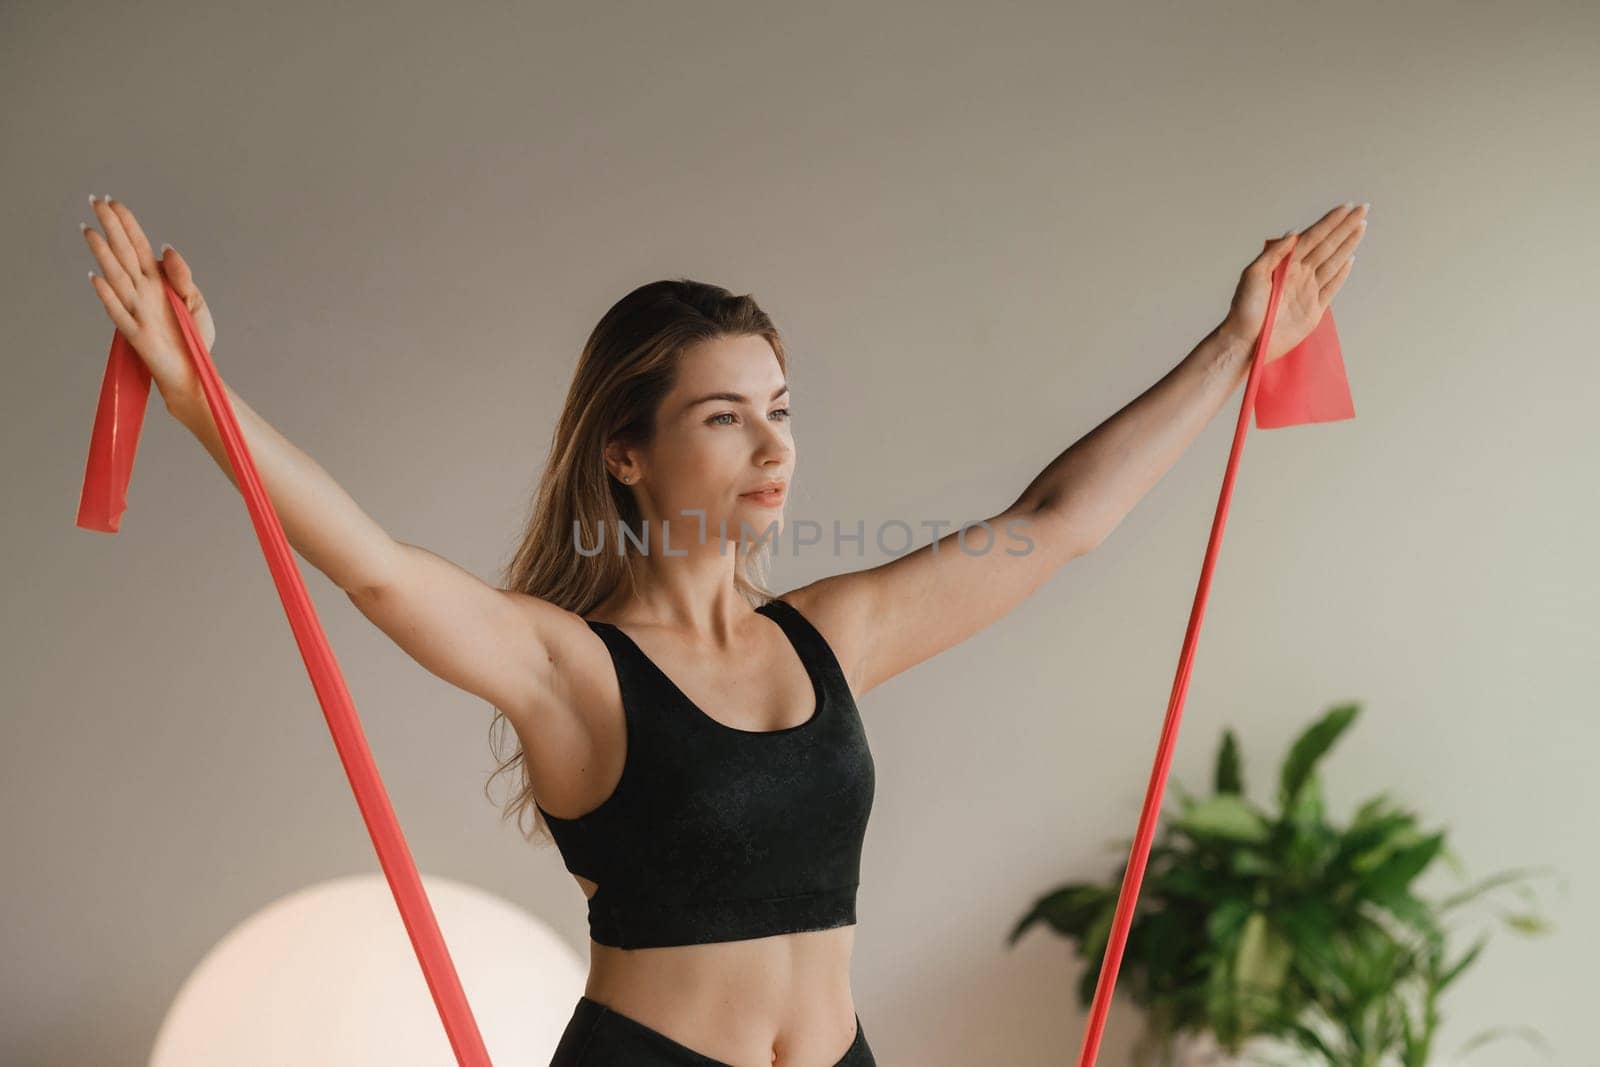 Girl in black doing fitness with red ribbons indoors.